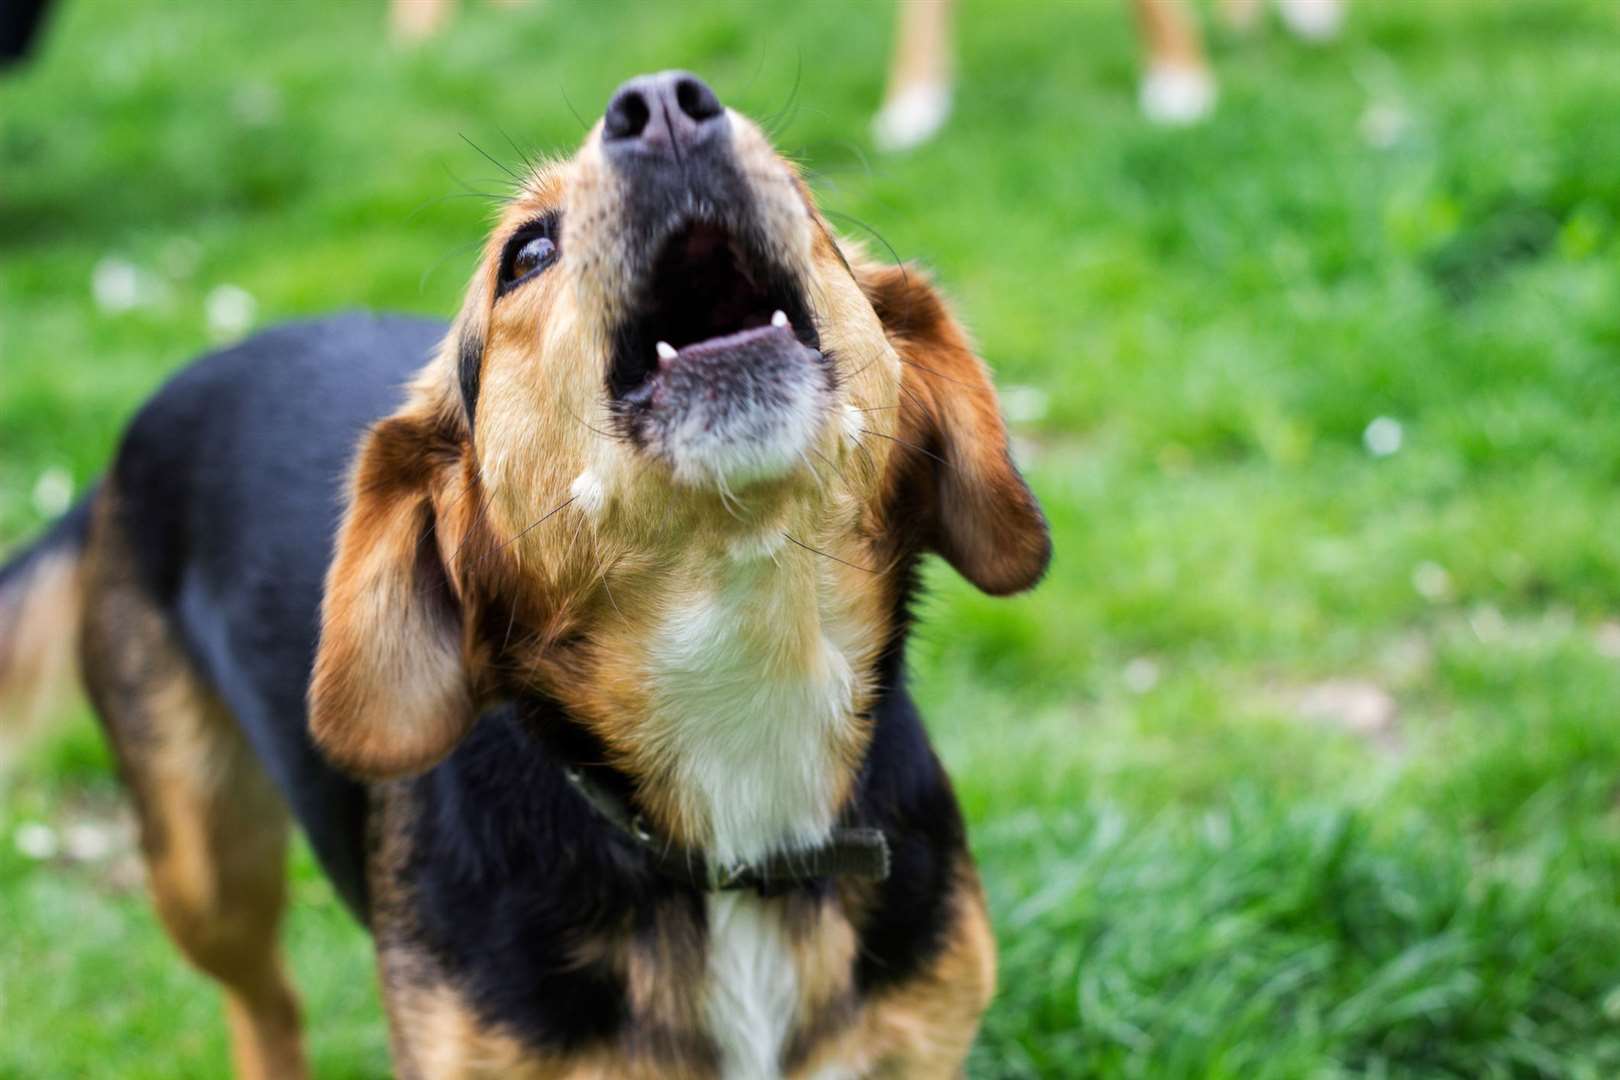 Dogs must remain under control at all times, says the law. Image: Stock image.